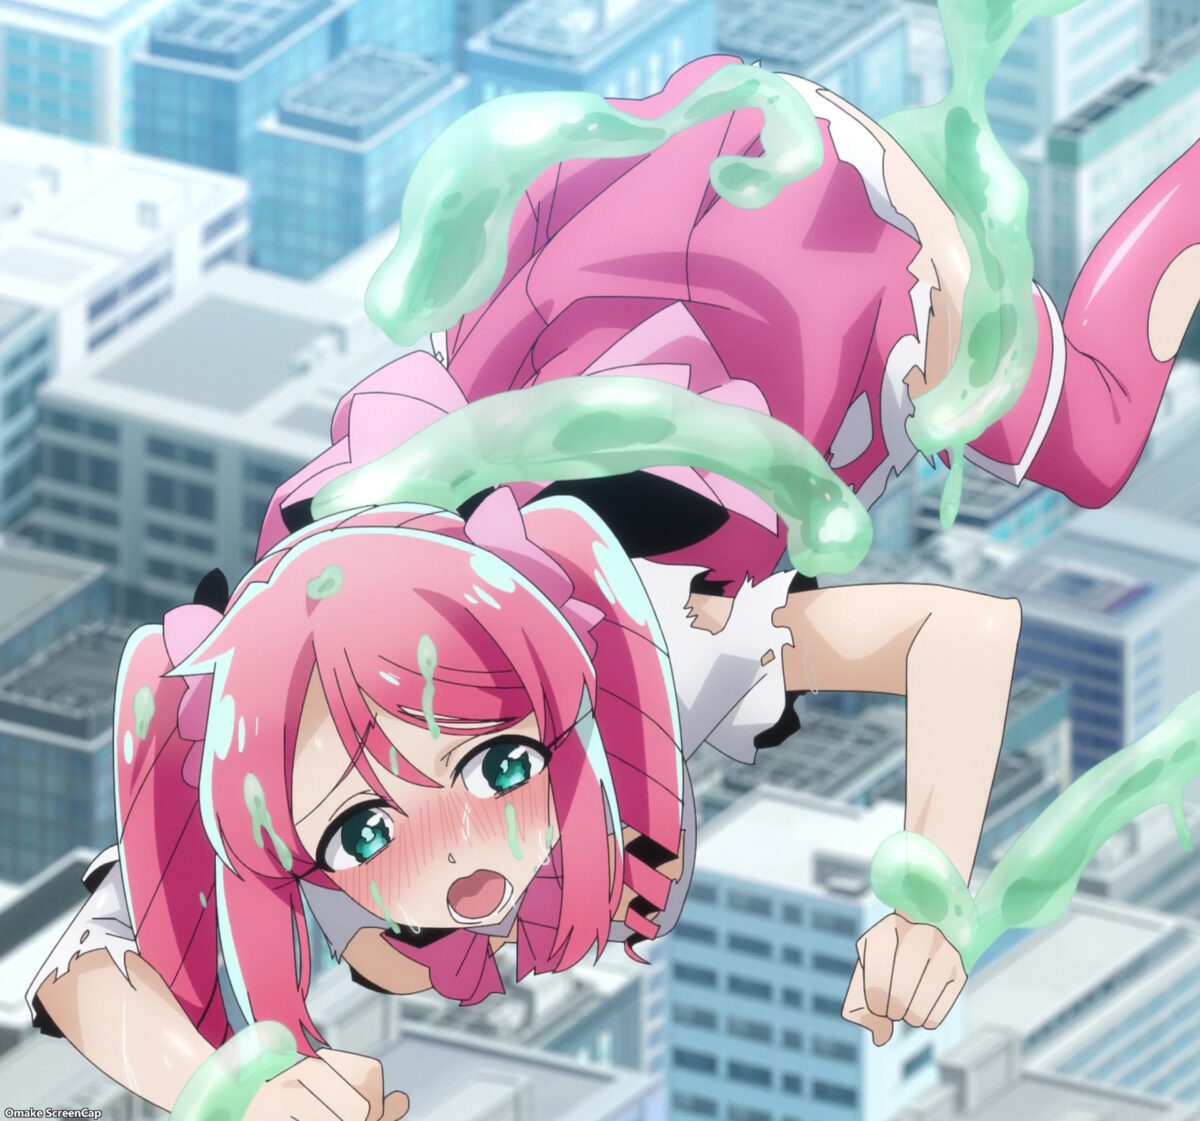 Gushing Over Magical Girls Episode 4 Magia Magenta Slime Tentacles